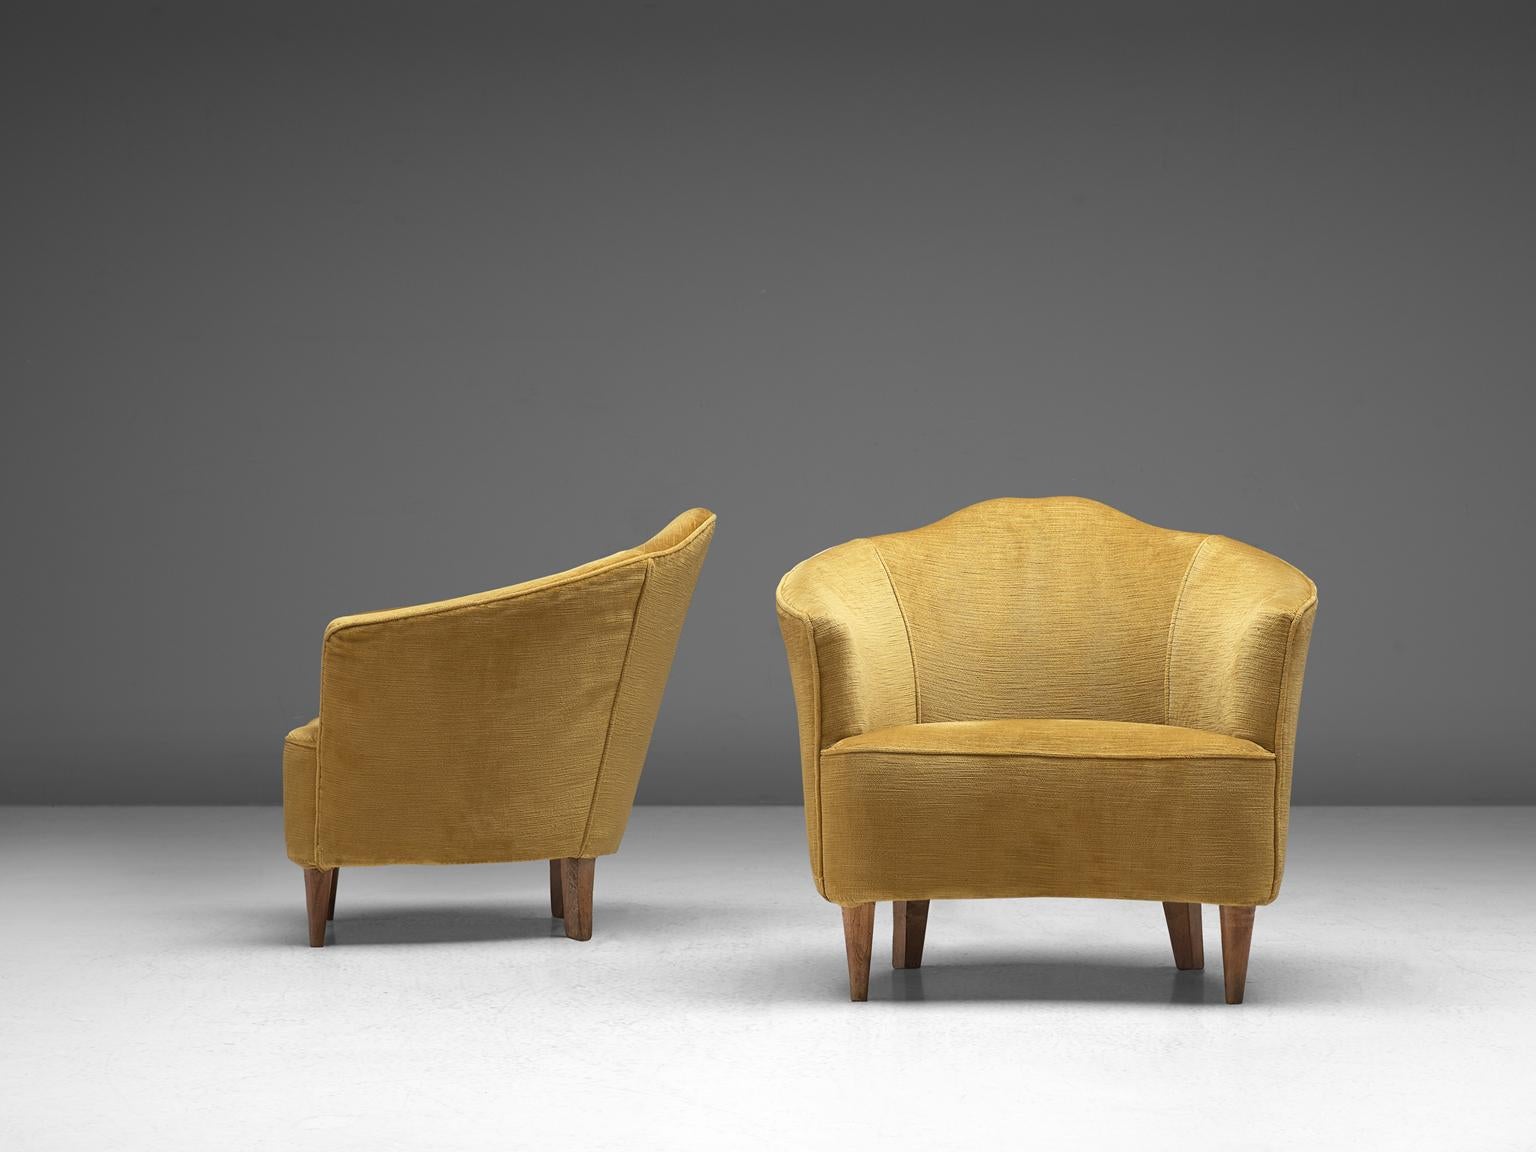 Pair of small chairs, fabric and beech, Italy, 1960s

This elegant, small pair of club chairs feature a round, waved back, which is higher in the middel and flows downwards to the armrests. The chairs have a mustard yellow velours, which is still